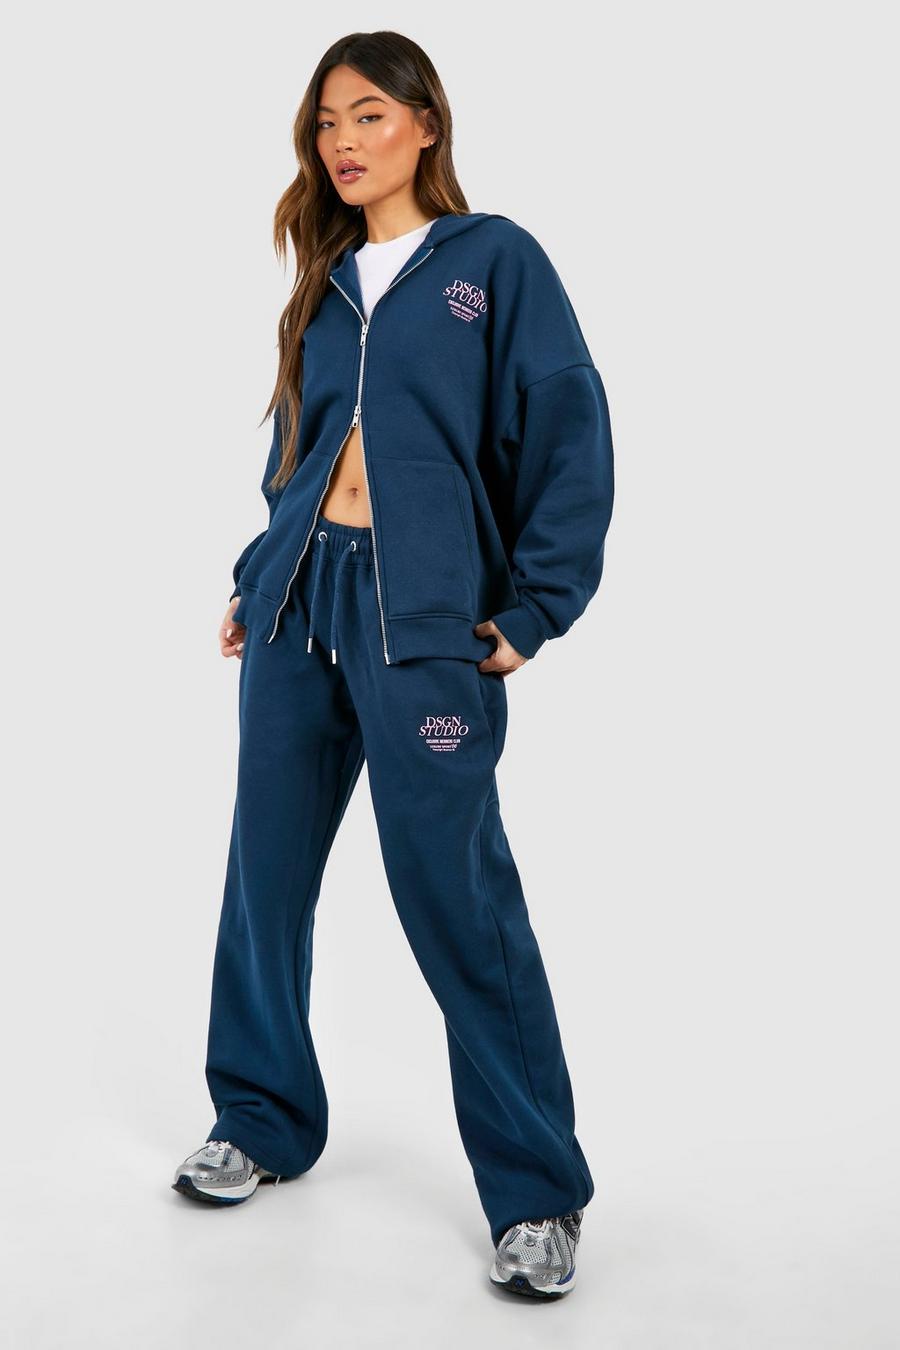 Women's Tracksuits, Tracksuit Sets For Women